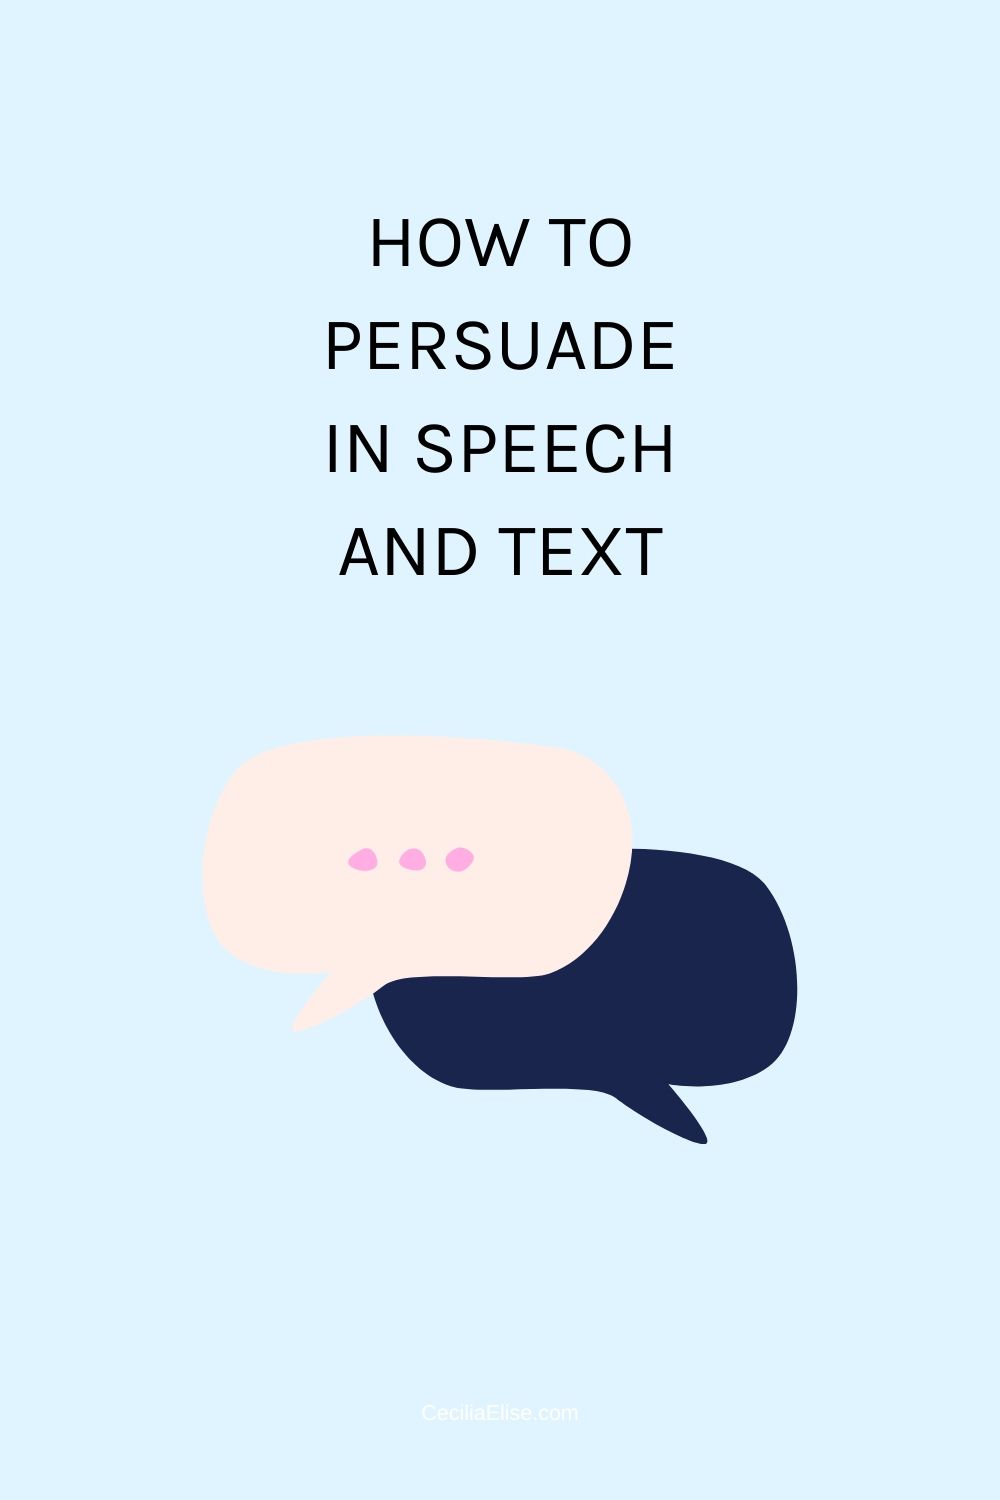 How to persuade in speech and text